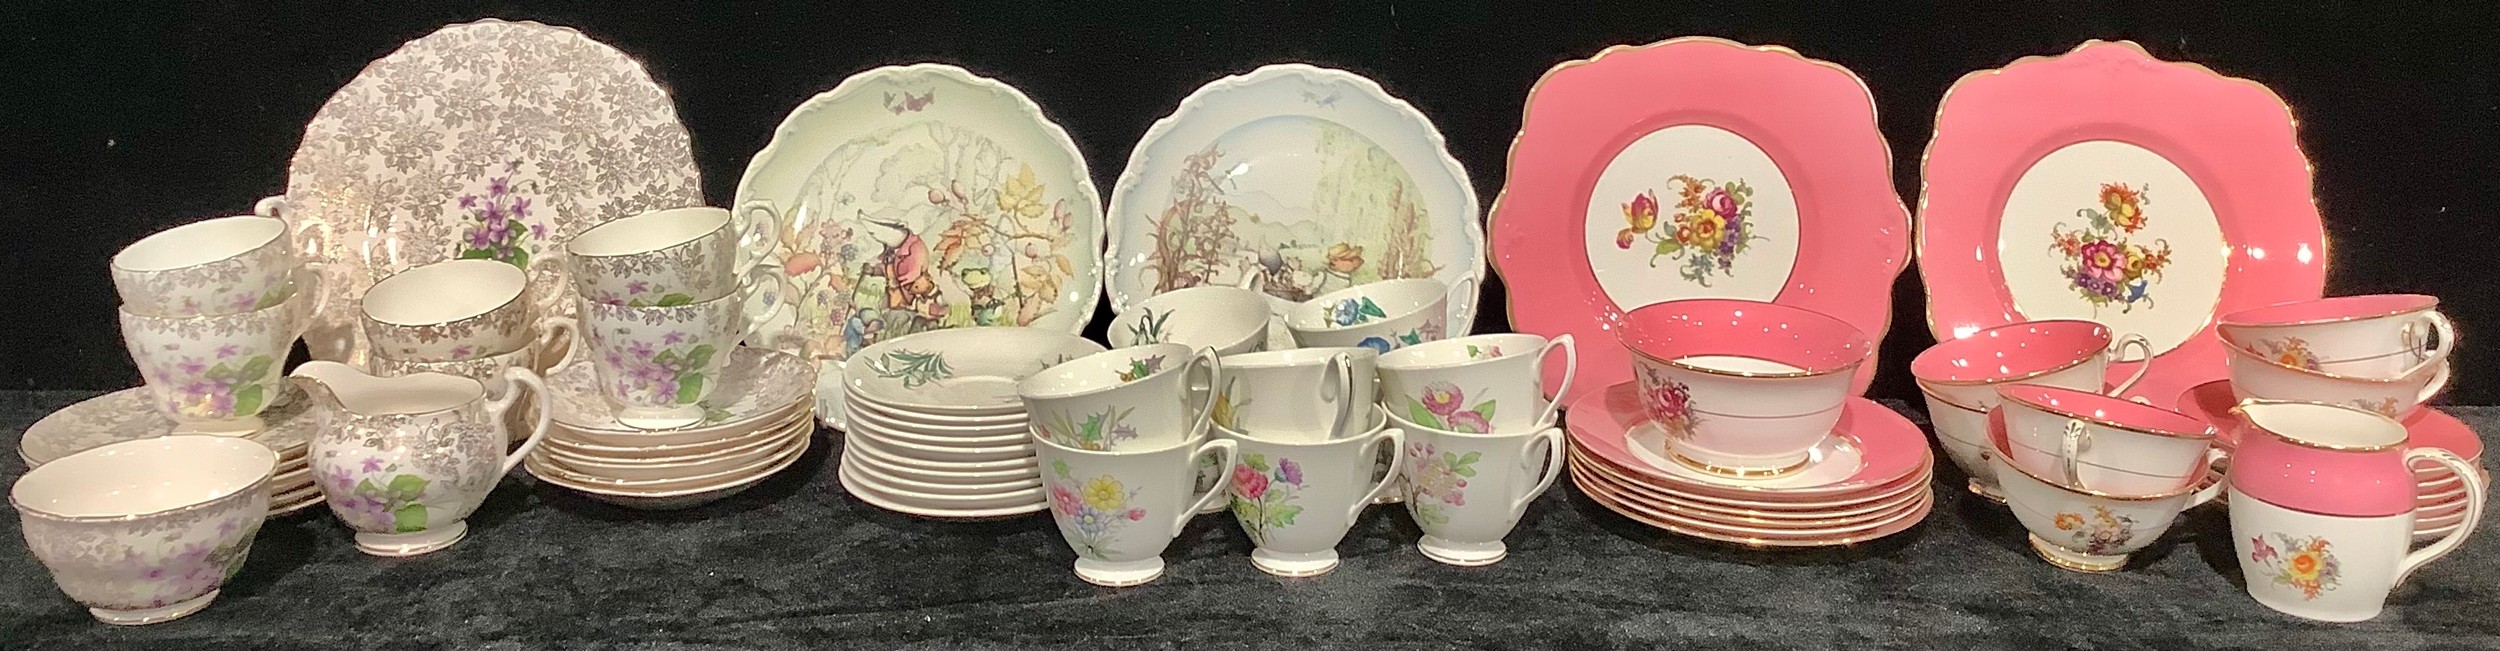 A Foley China tea service for six, decorated with flowers within a broad pink border, comprising